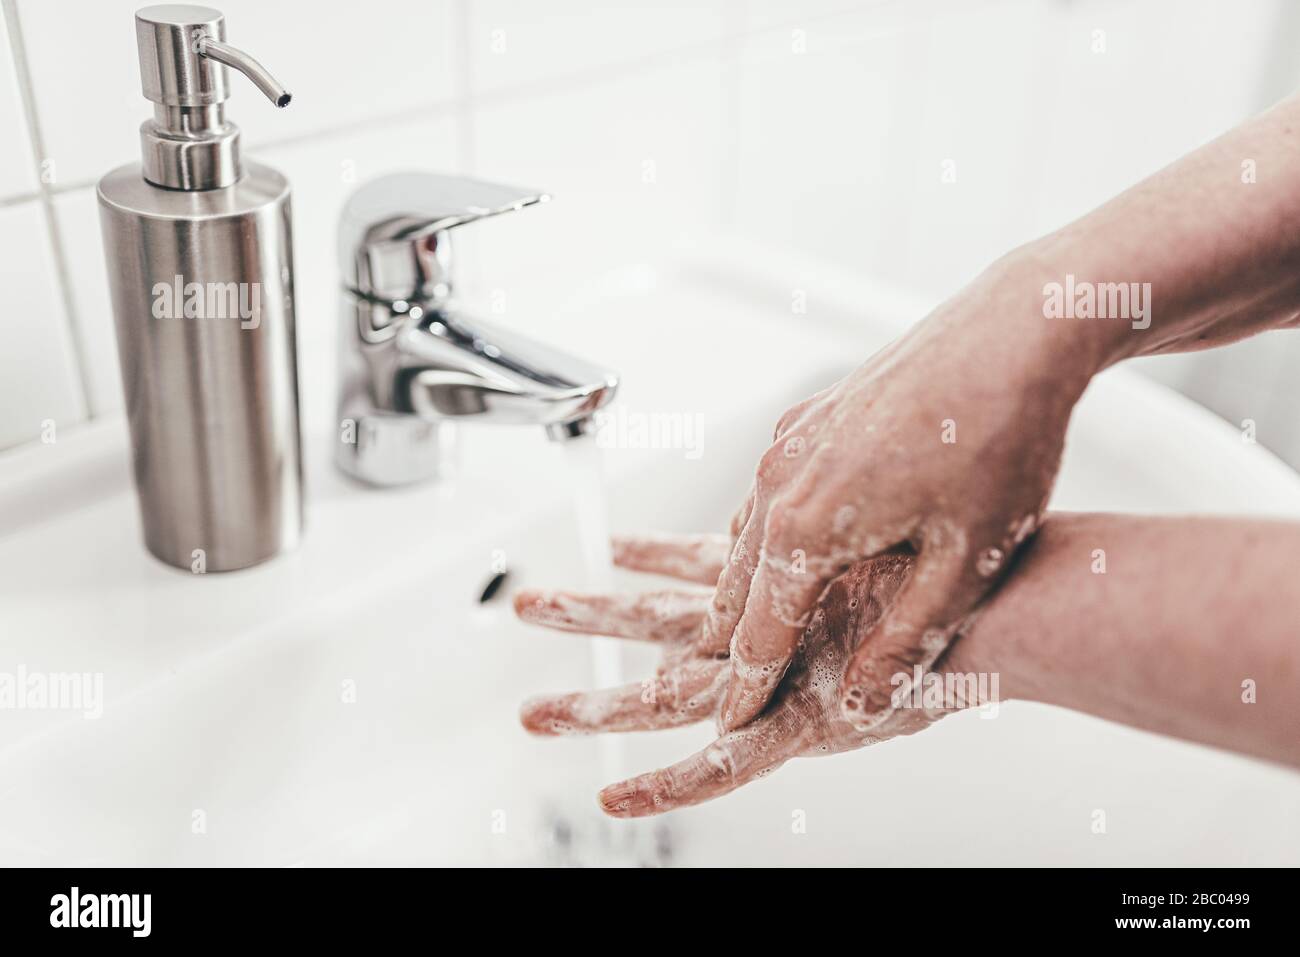 close-up shot of woman thoroughtly washing her hands with soap at lavatory, hygiene measure during covid-19 coronavirus outbreak Stock Photo